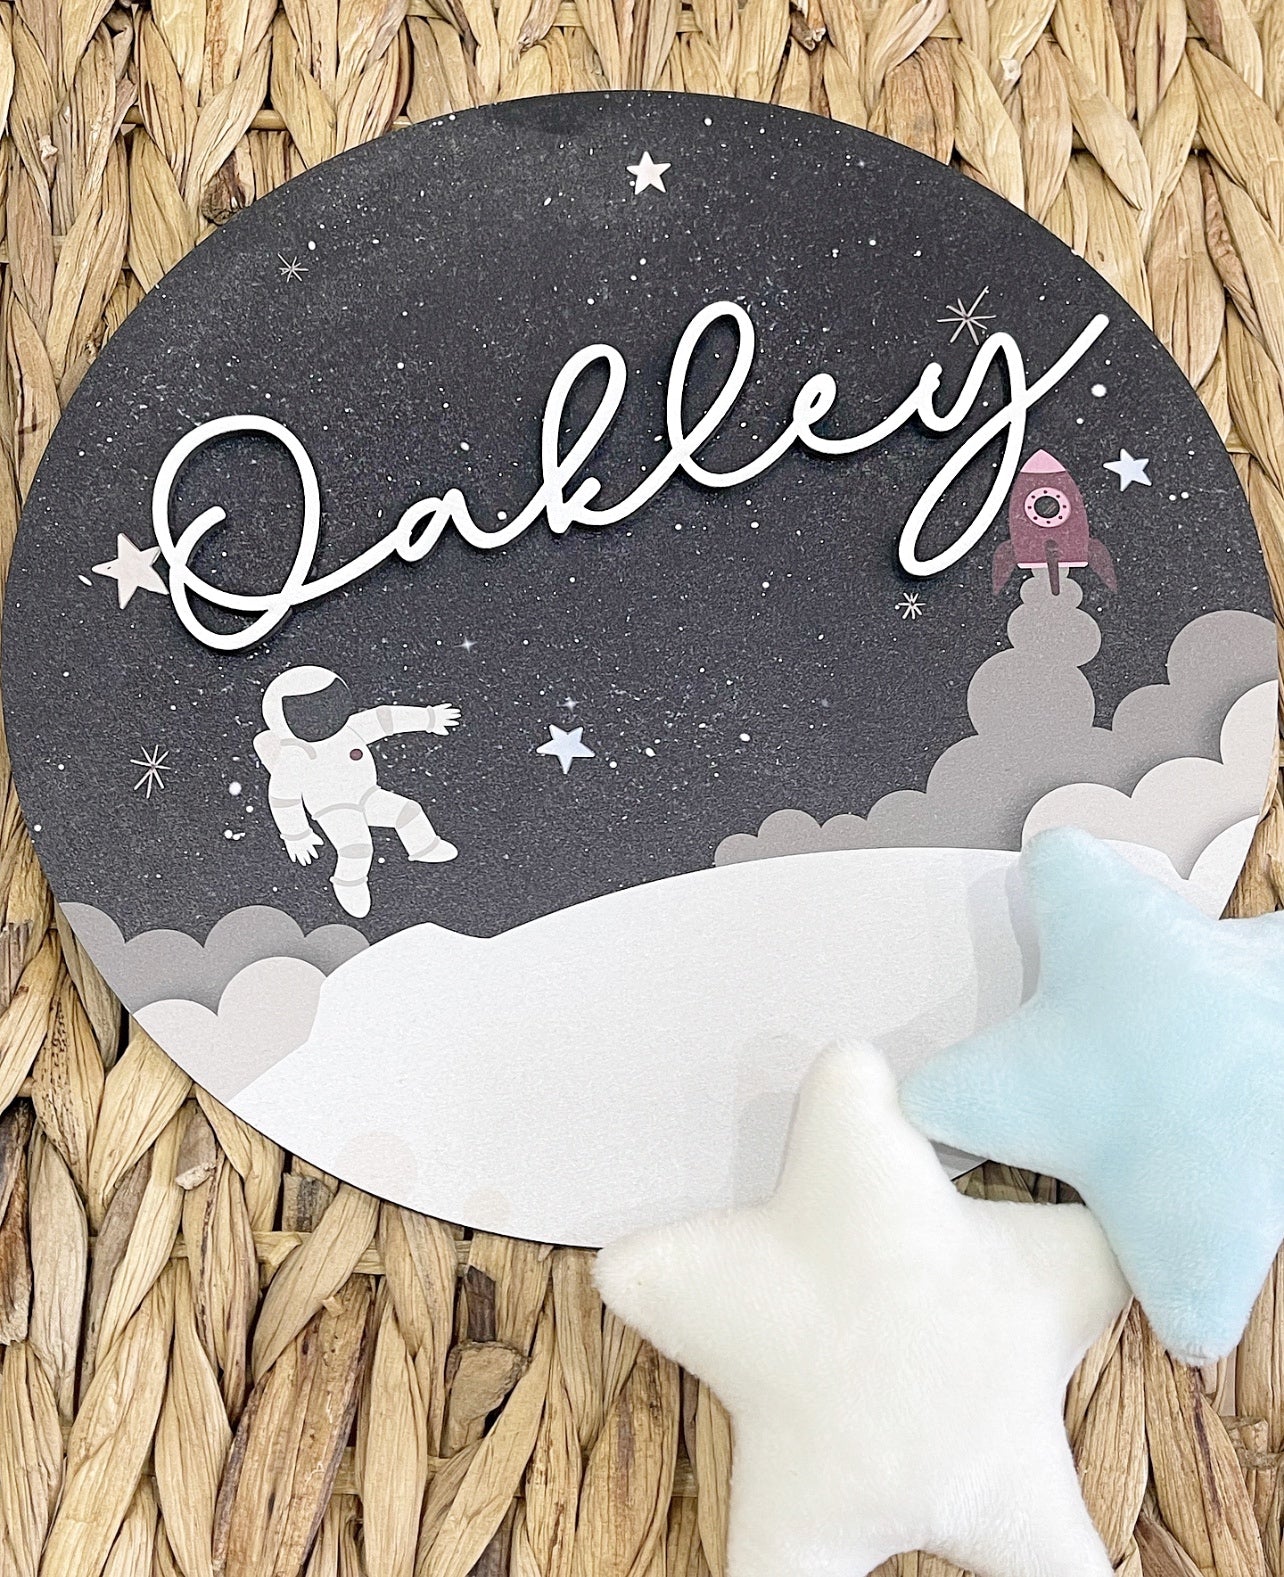 Space Man Printed Plaque - Cute as a Button by Laura